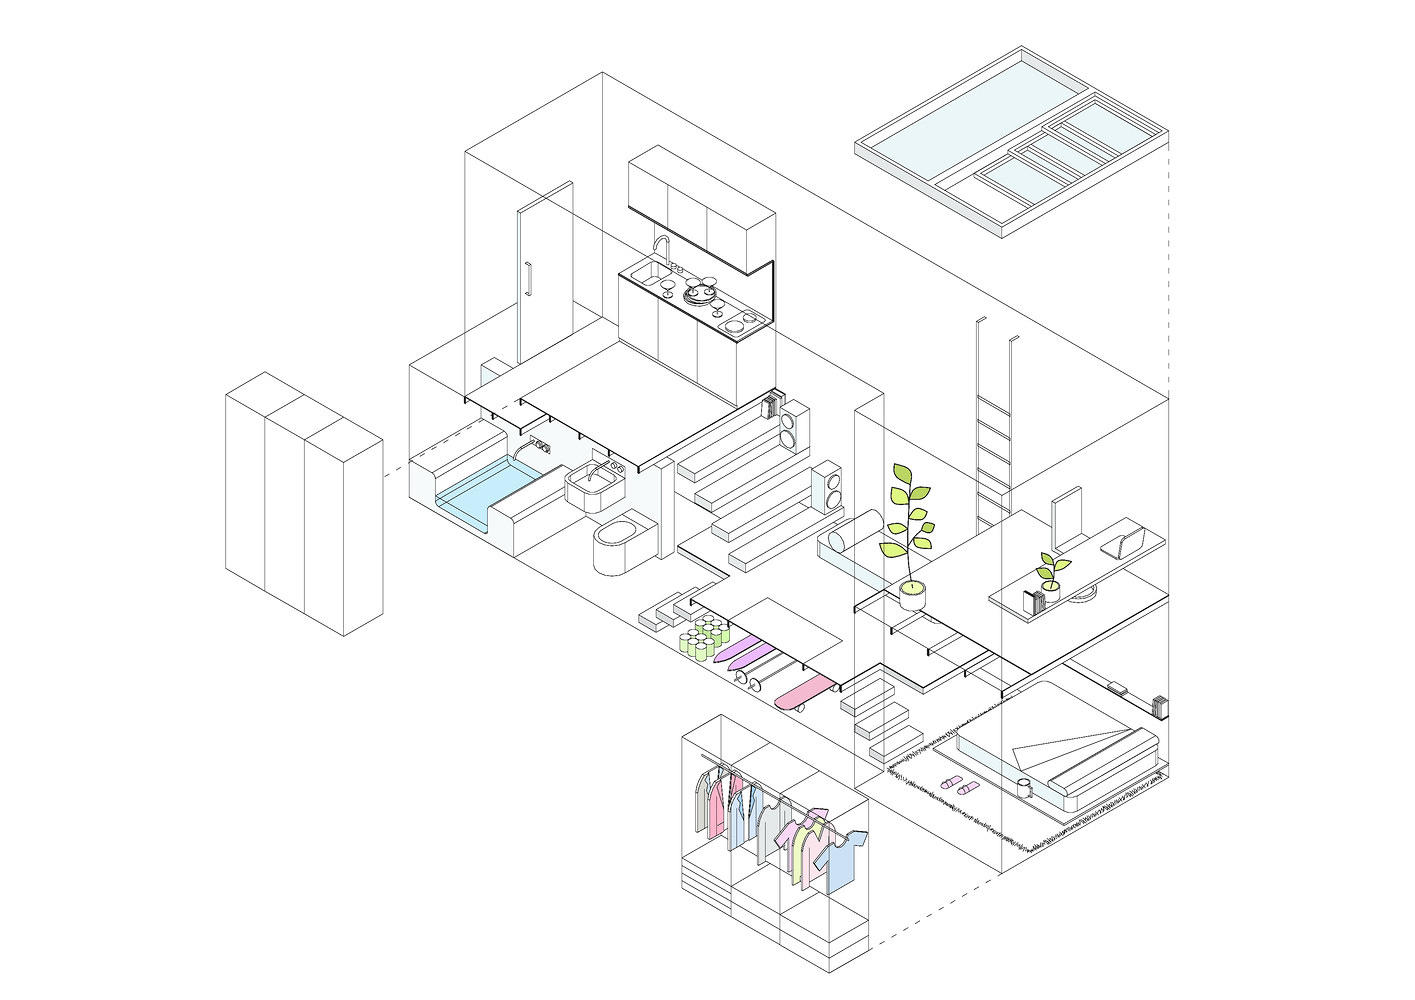 Micro Living: Making a Big Impact with Small Spaces - Huset